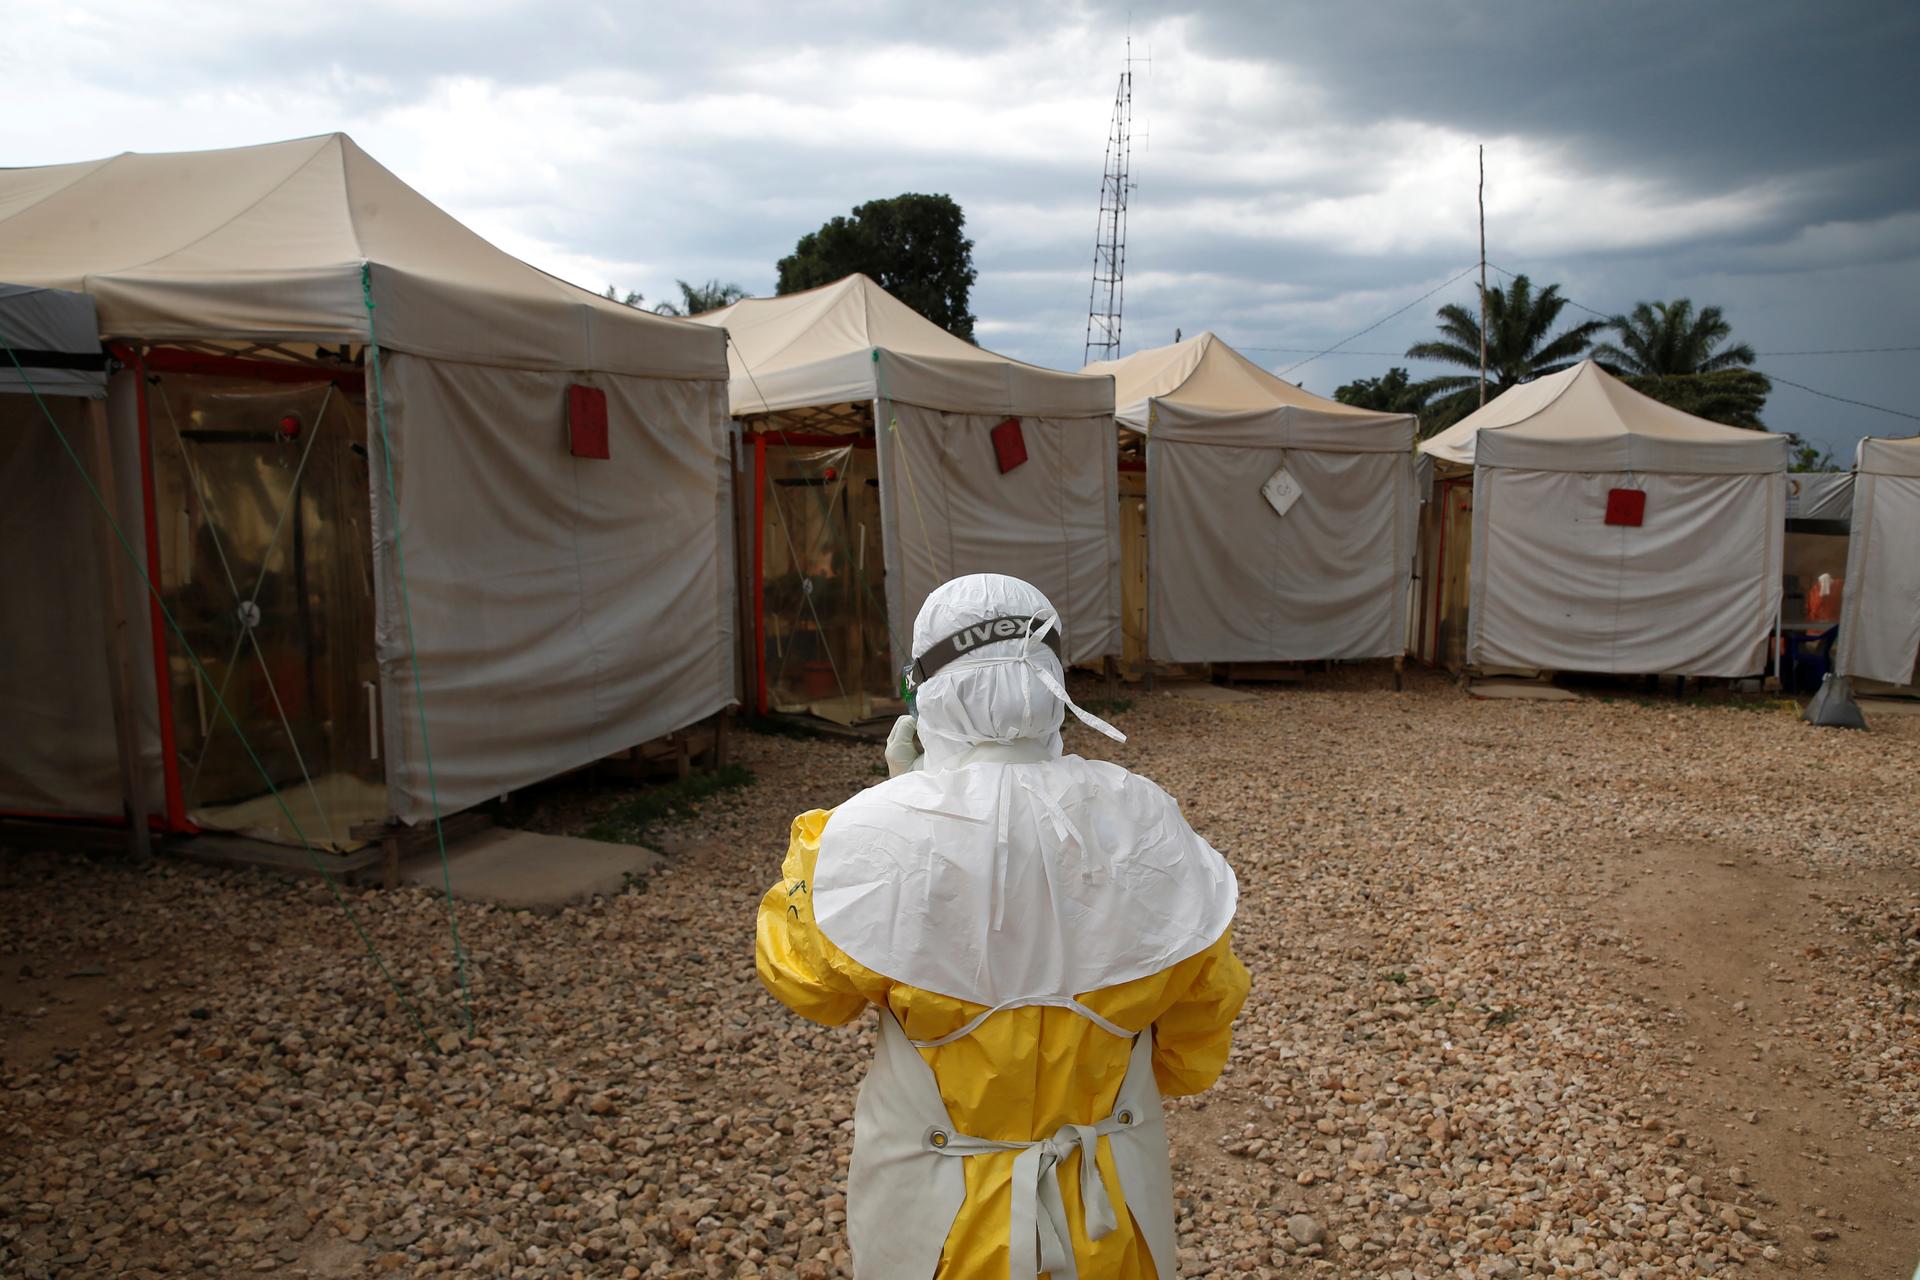 A health worker wearing Ebola protection gear walks next to tents.